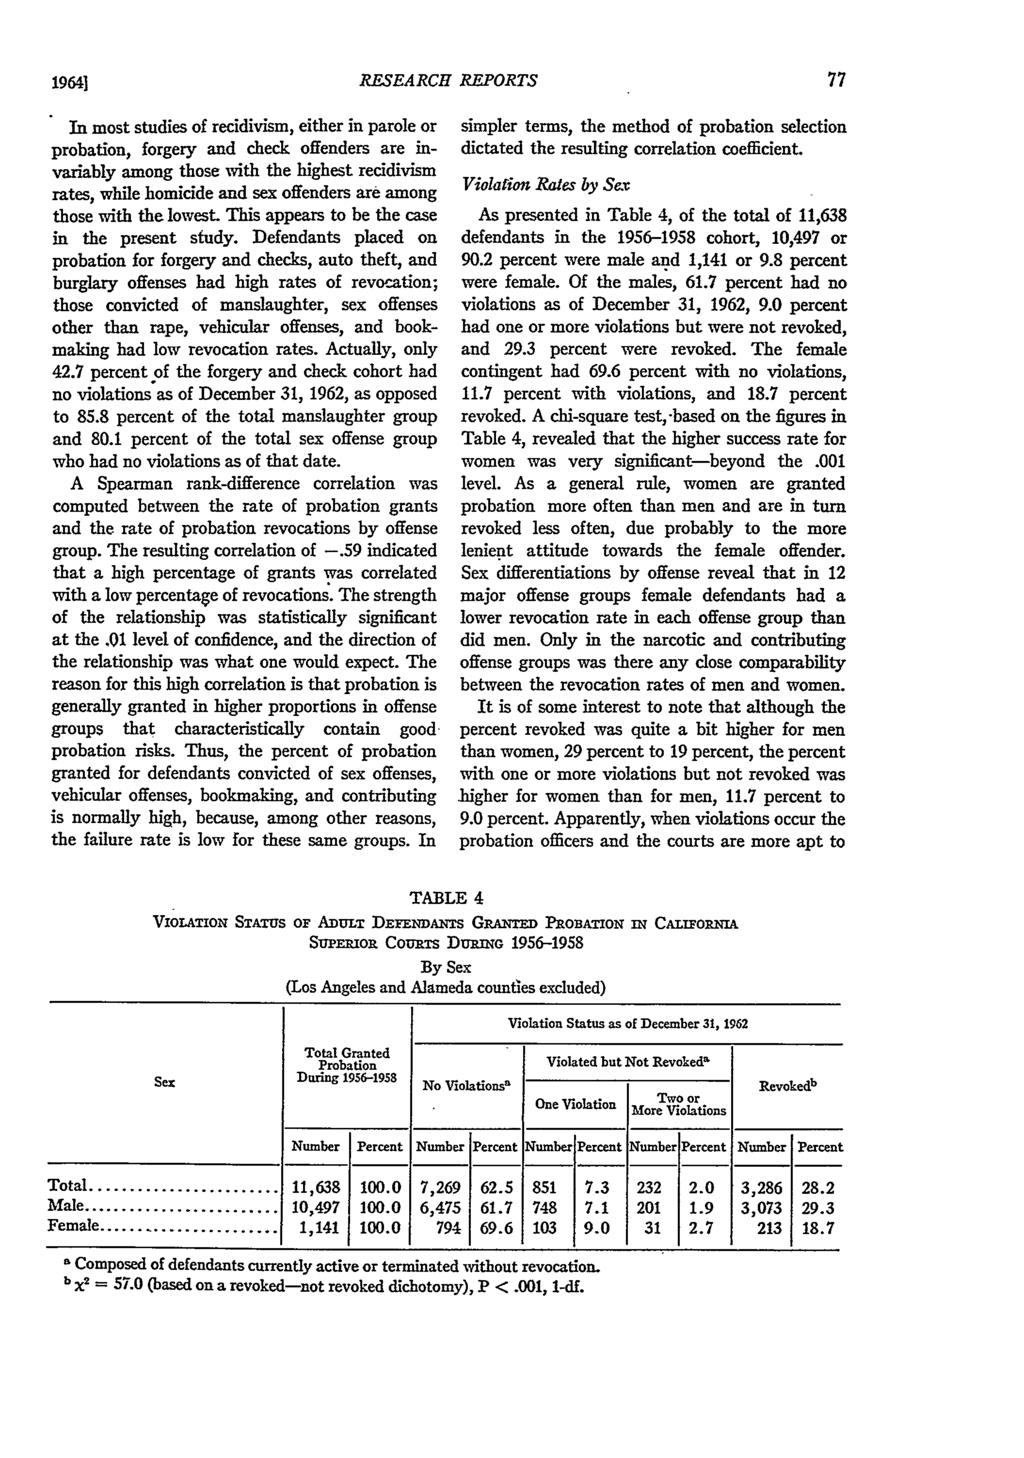 19641 RESEARCH REPORTS In most studies of recidivism, either in parole or probation, forgery and check offenders are invariably among those with the highest recidivism rates, while homicide and sex